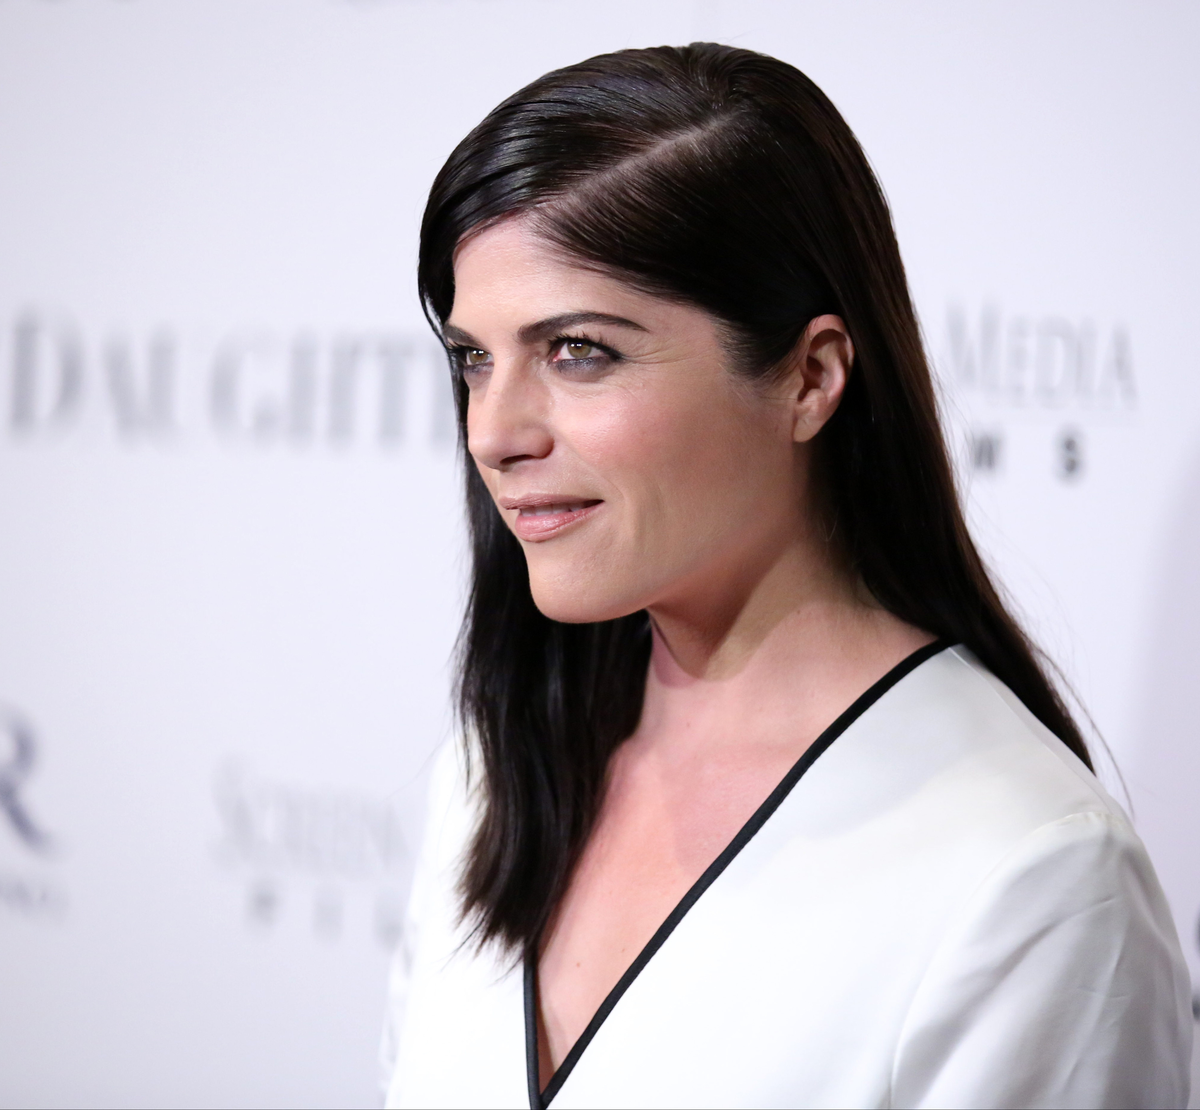 preview for Actress Selma Blair removed from plane on stretcher after 'outburst'